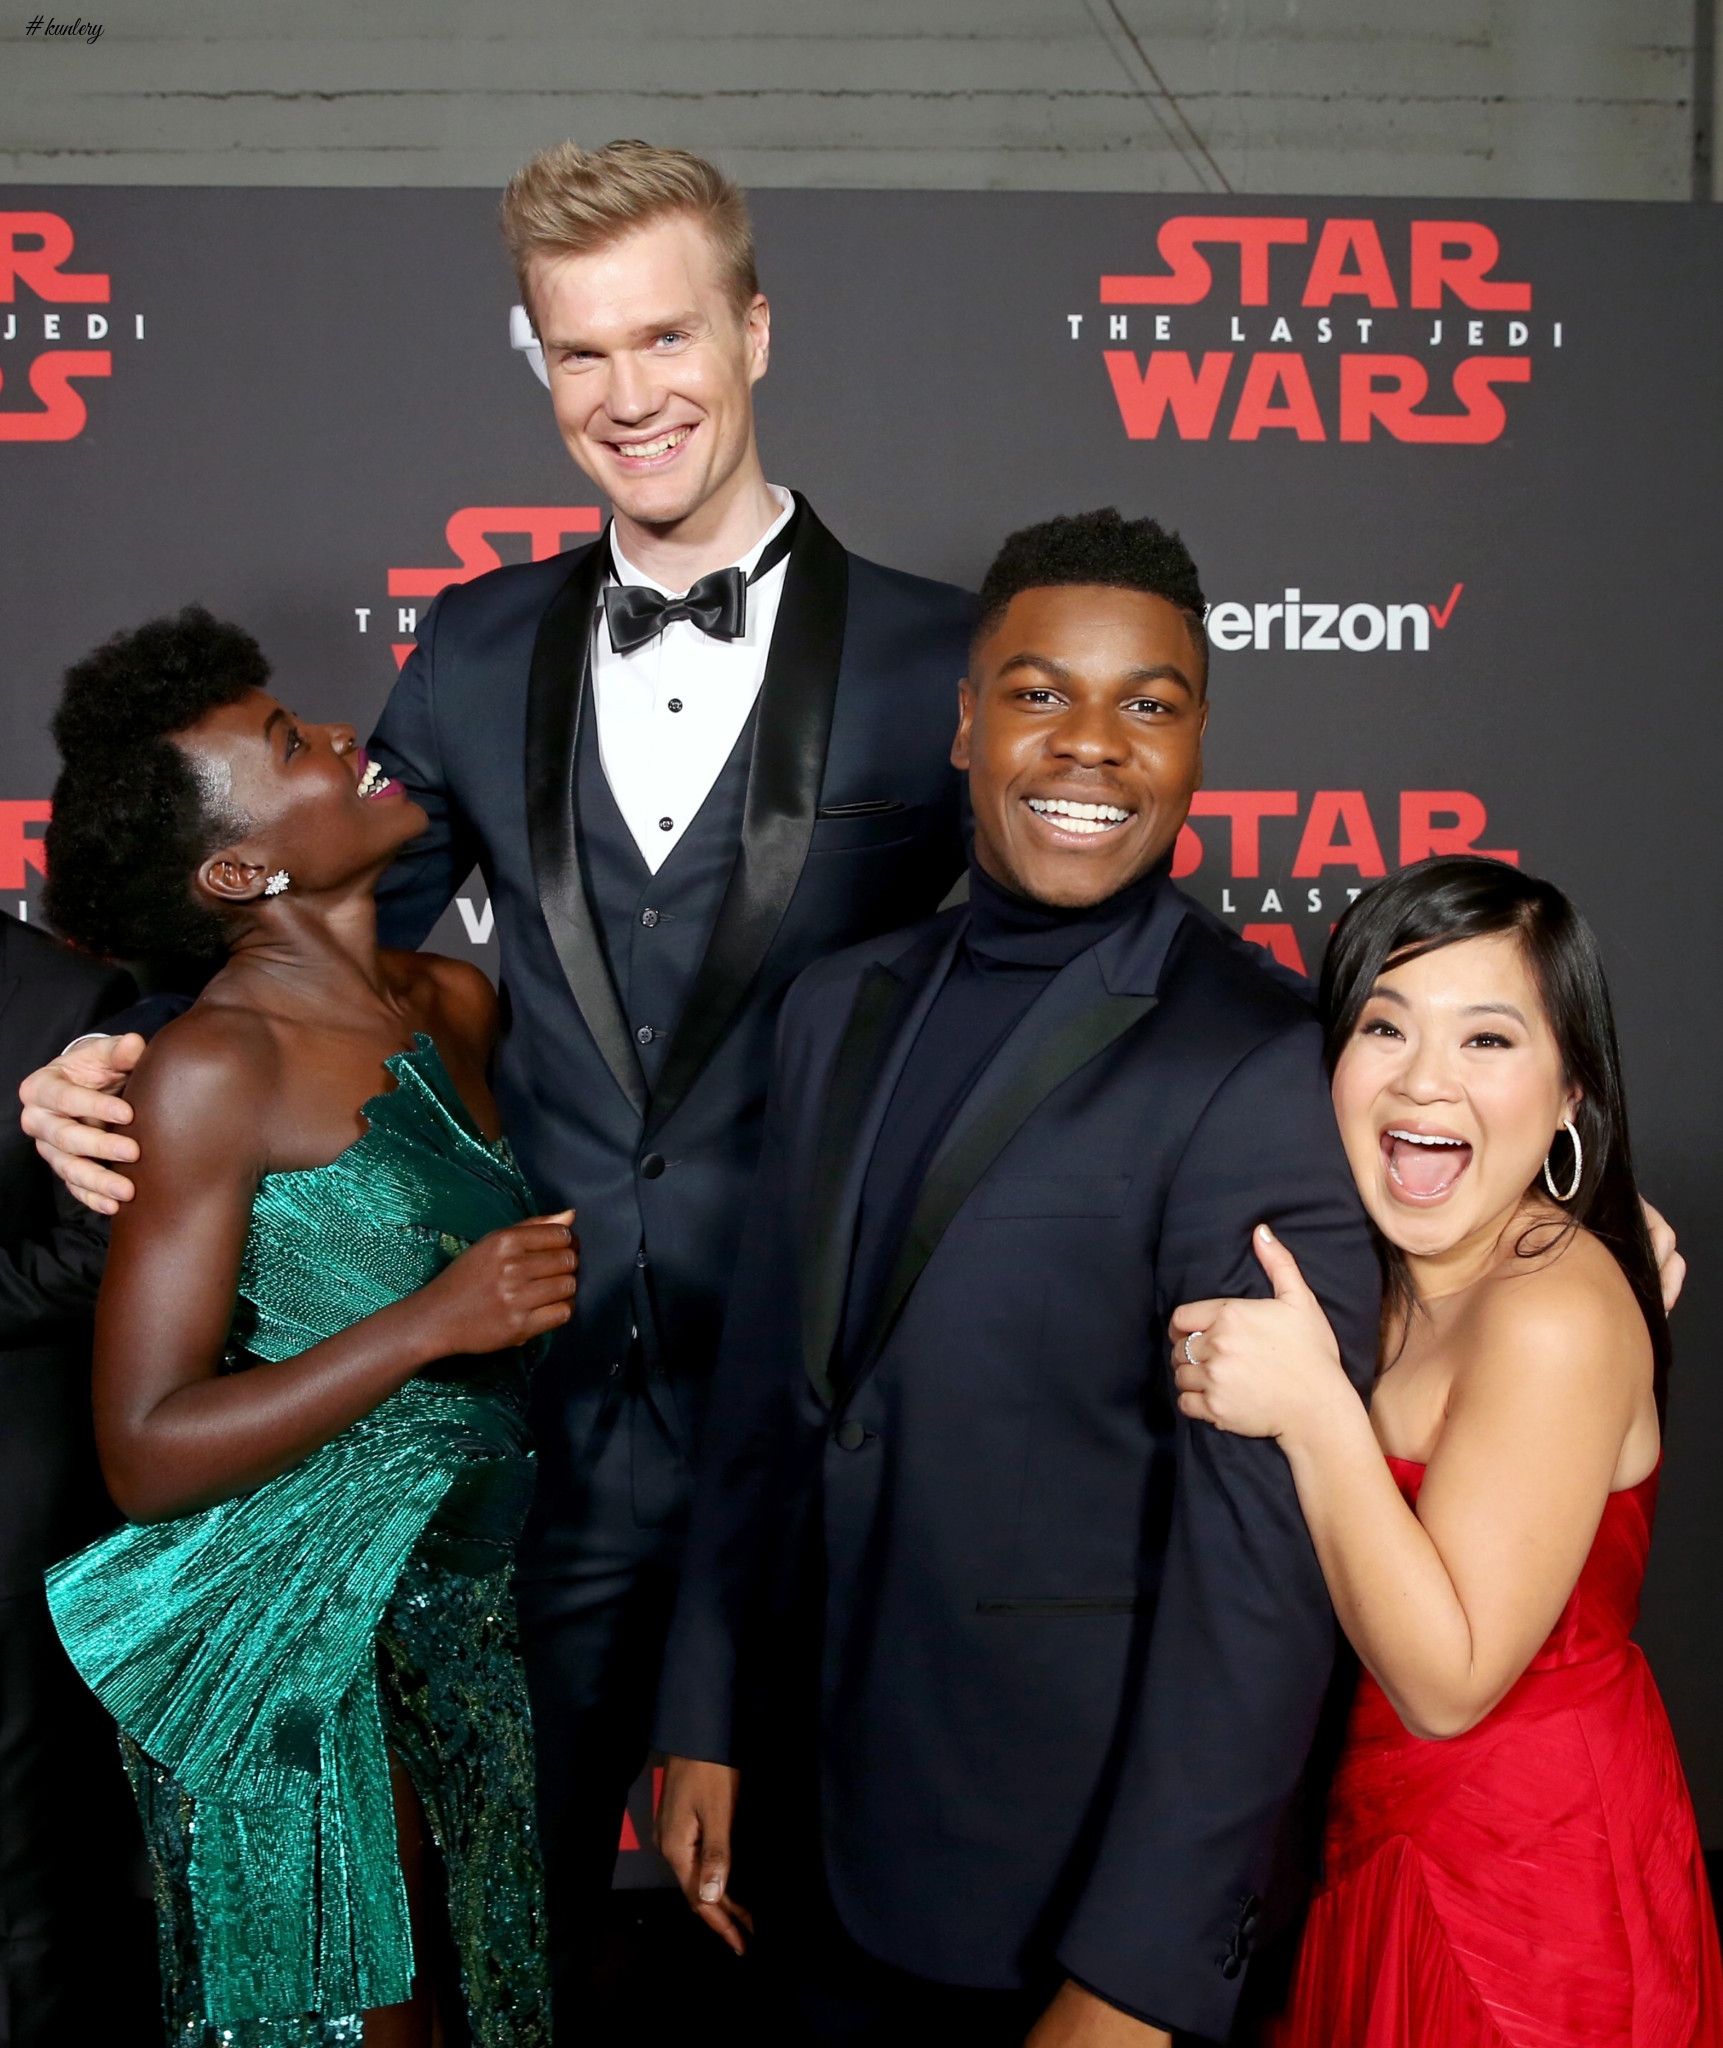 Lupita Nyong’o, John Boyega, More Attended The World Premiere Of “Star Wars: The Last Jedi”